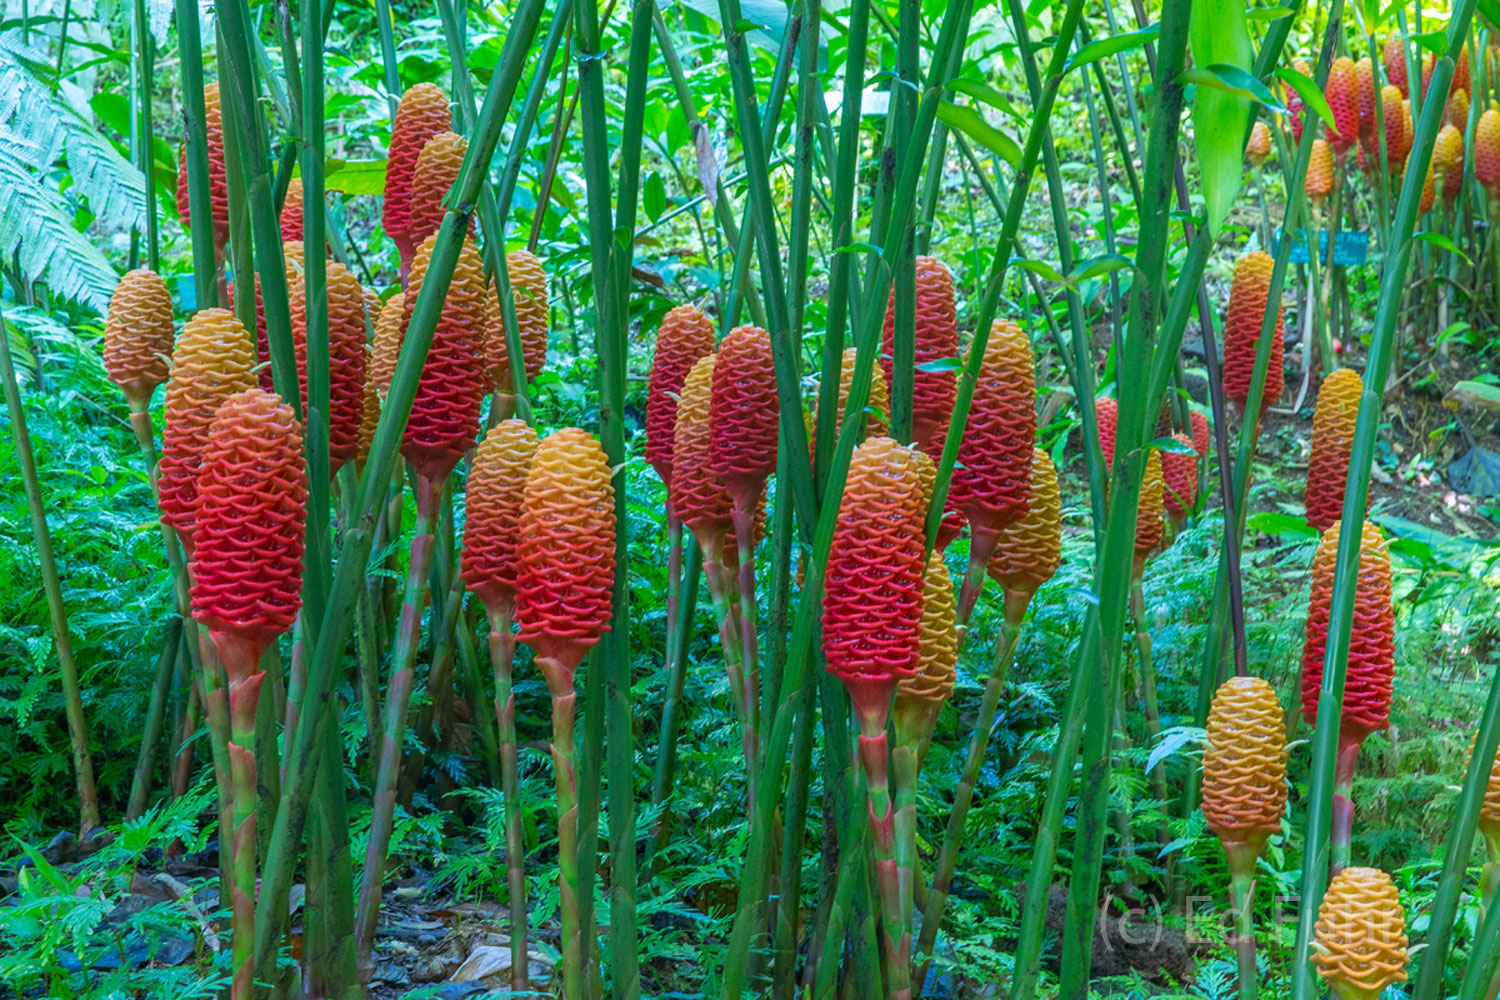 A bed of ginger grows in the damp ground below towering trees in the Big Island's fantastic tropical garden